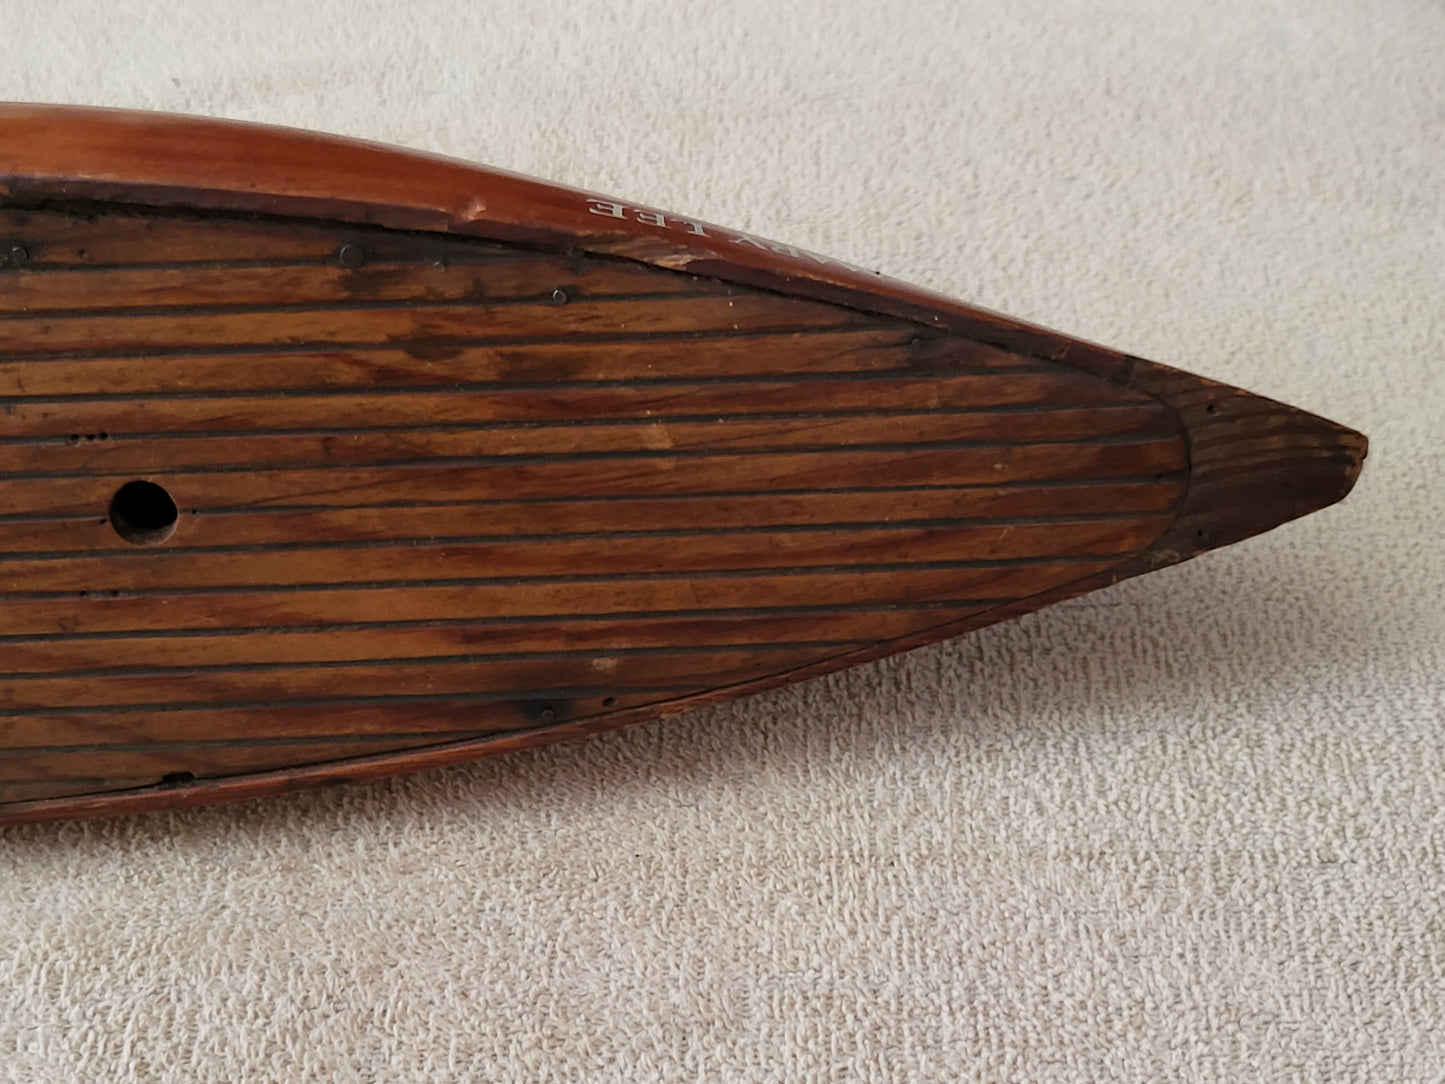 Vintage / Antique 25" Wooden Toy Pond Yacht Sailboat Hull - Weighted at Bottom